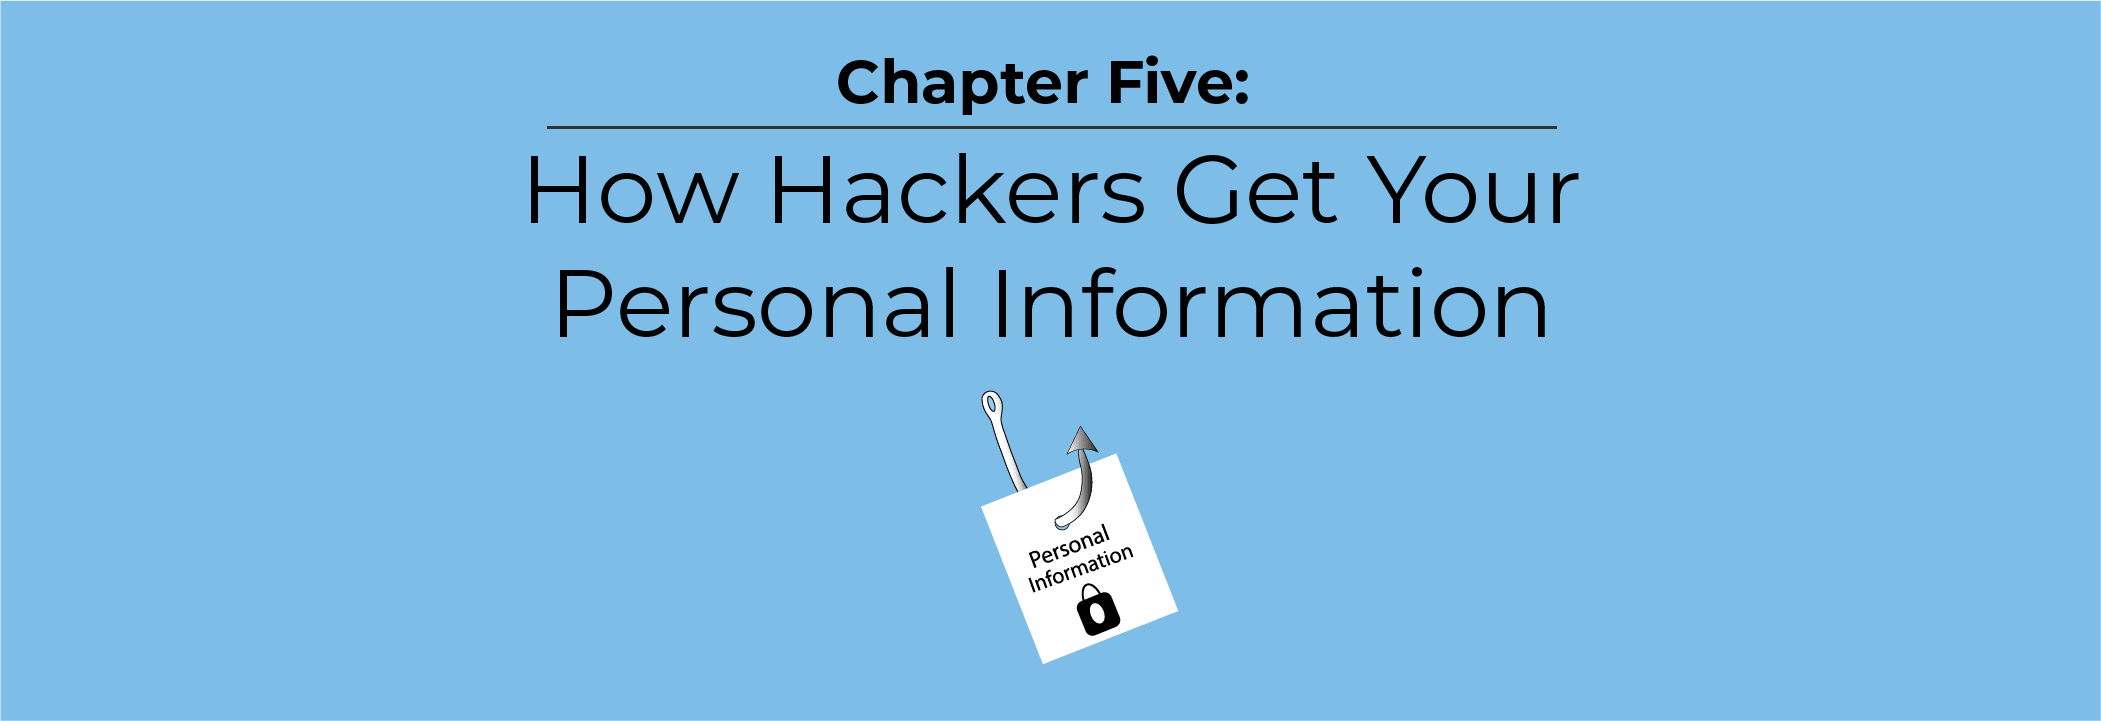 How Hackers Get Your Personal Information